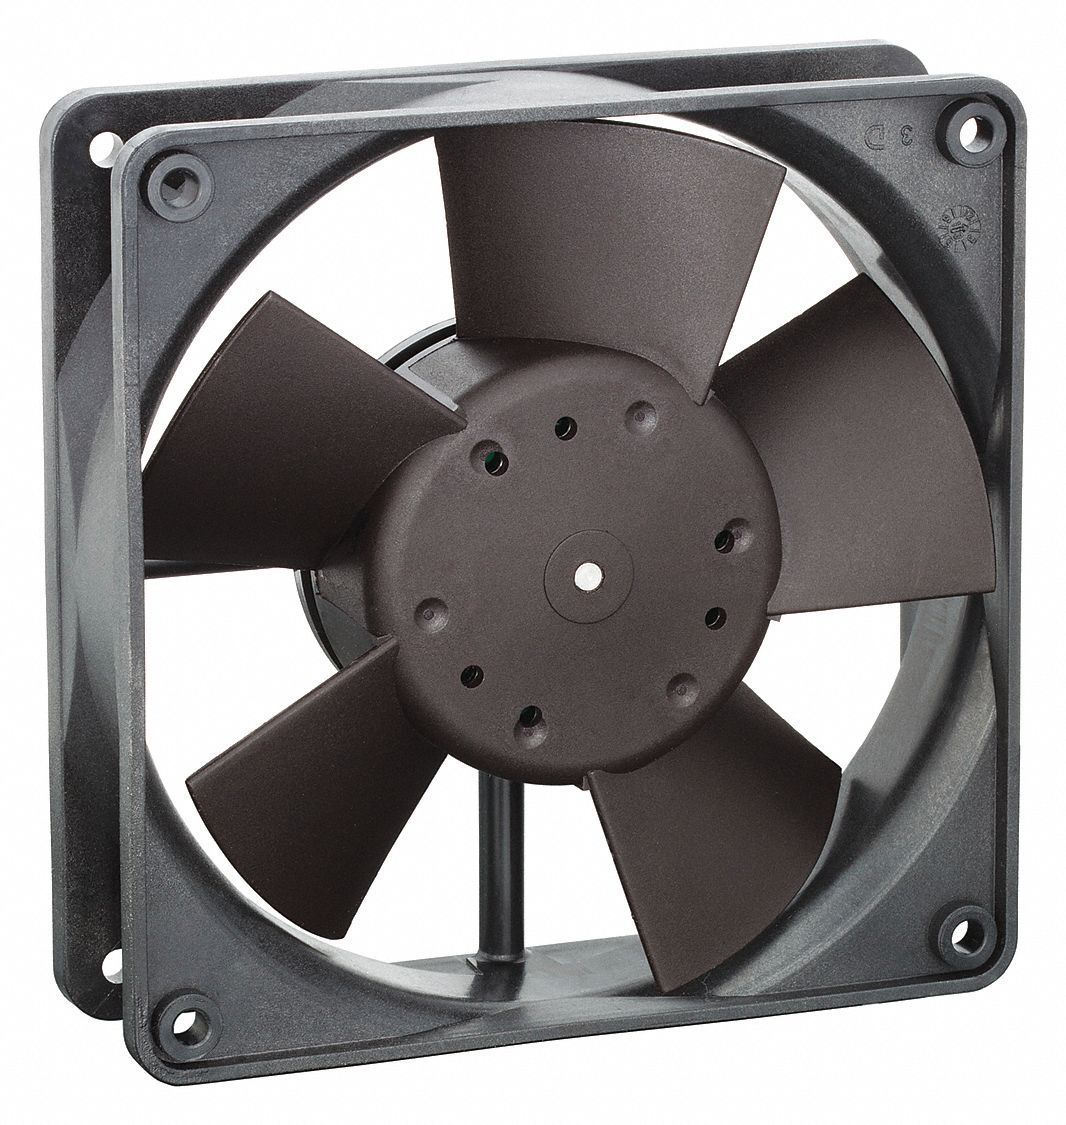 Square Axial Fan, 4 11/16 Inch X 4 11/16 Inch X 1 17/64 Inch Size, 12VDC